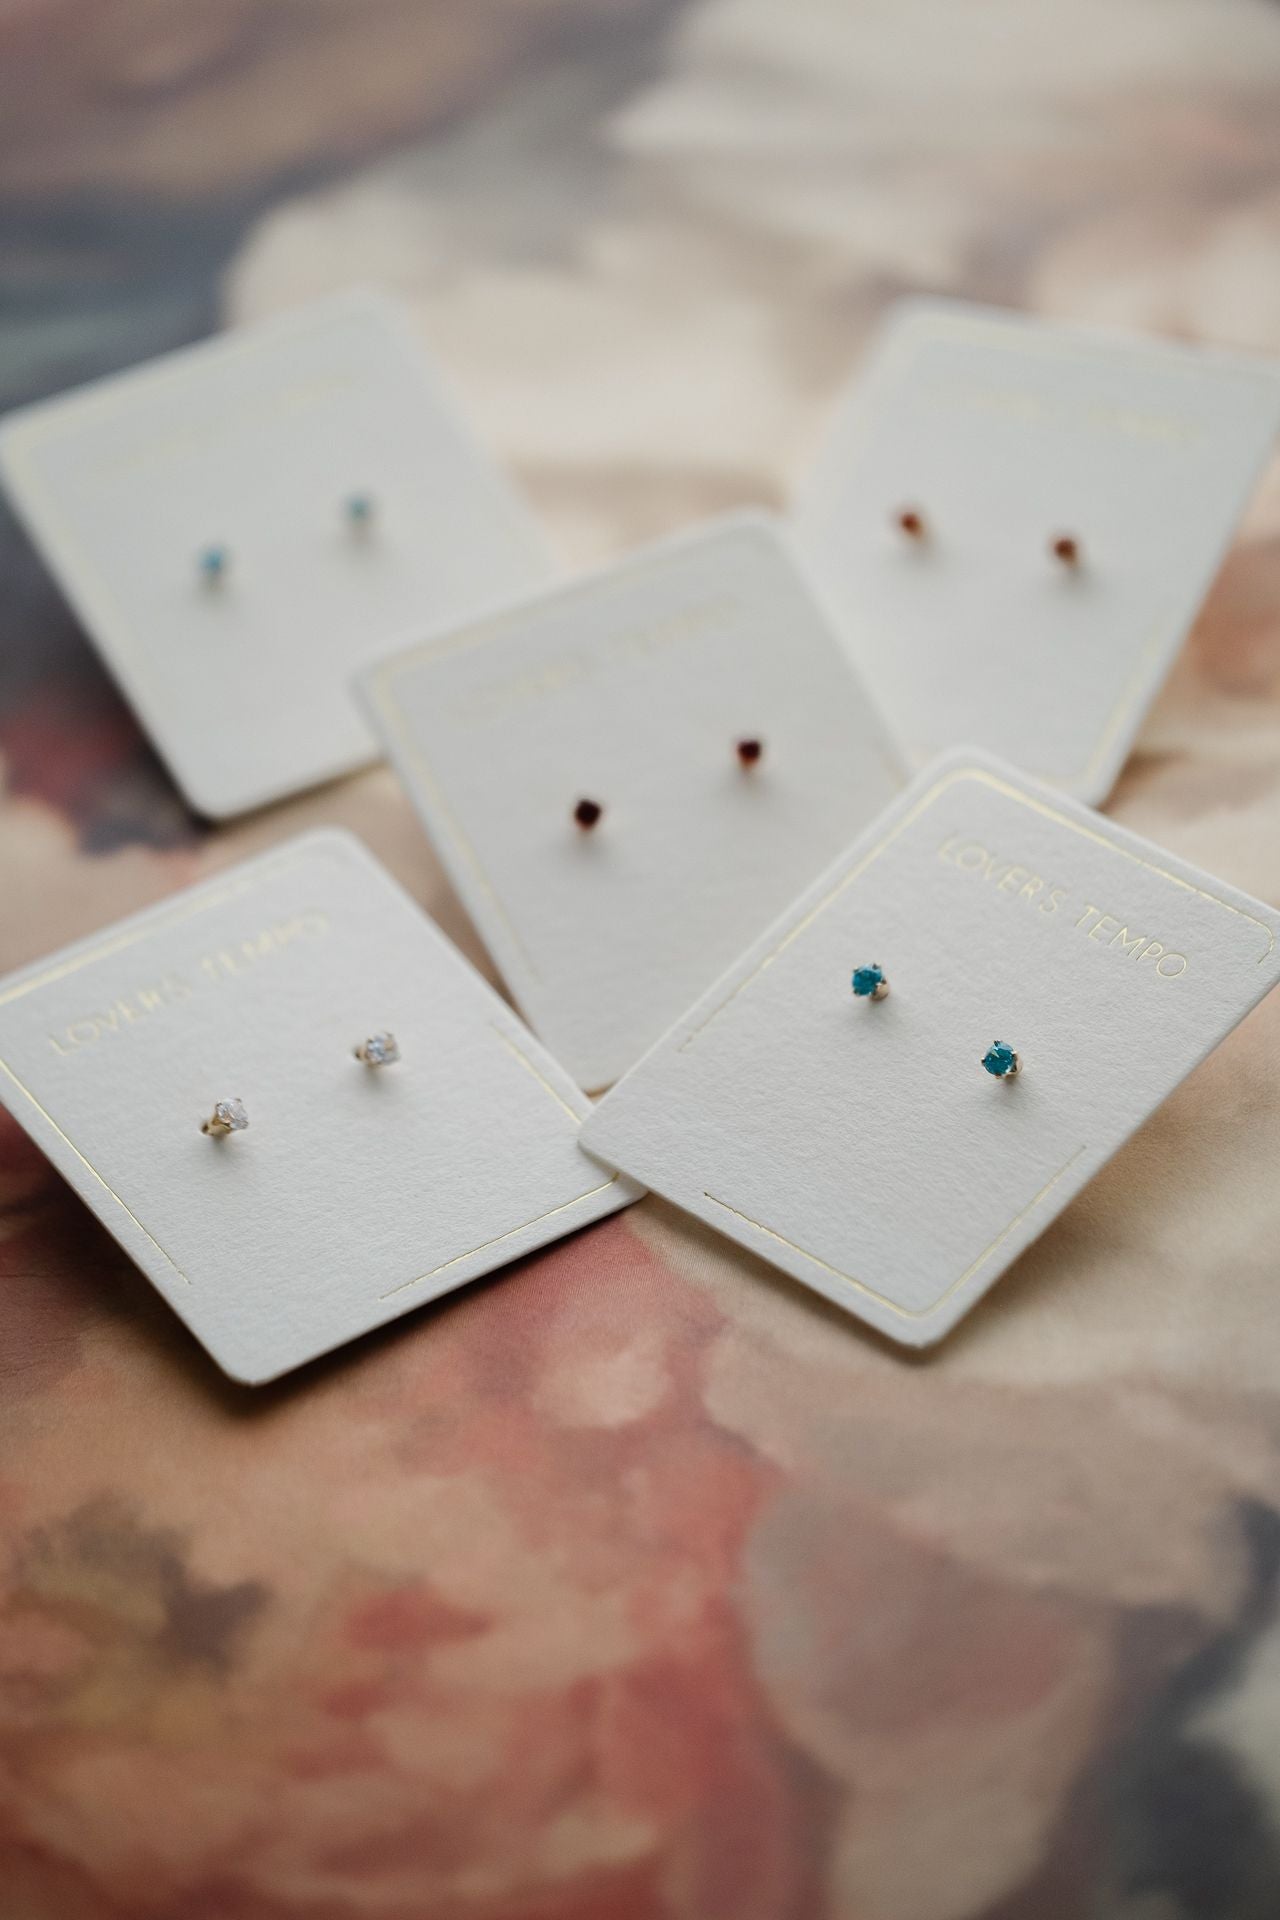 Lovers Tempo Gold-Filled Birthstone Stud Earring